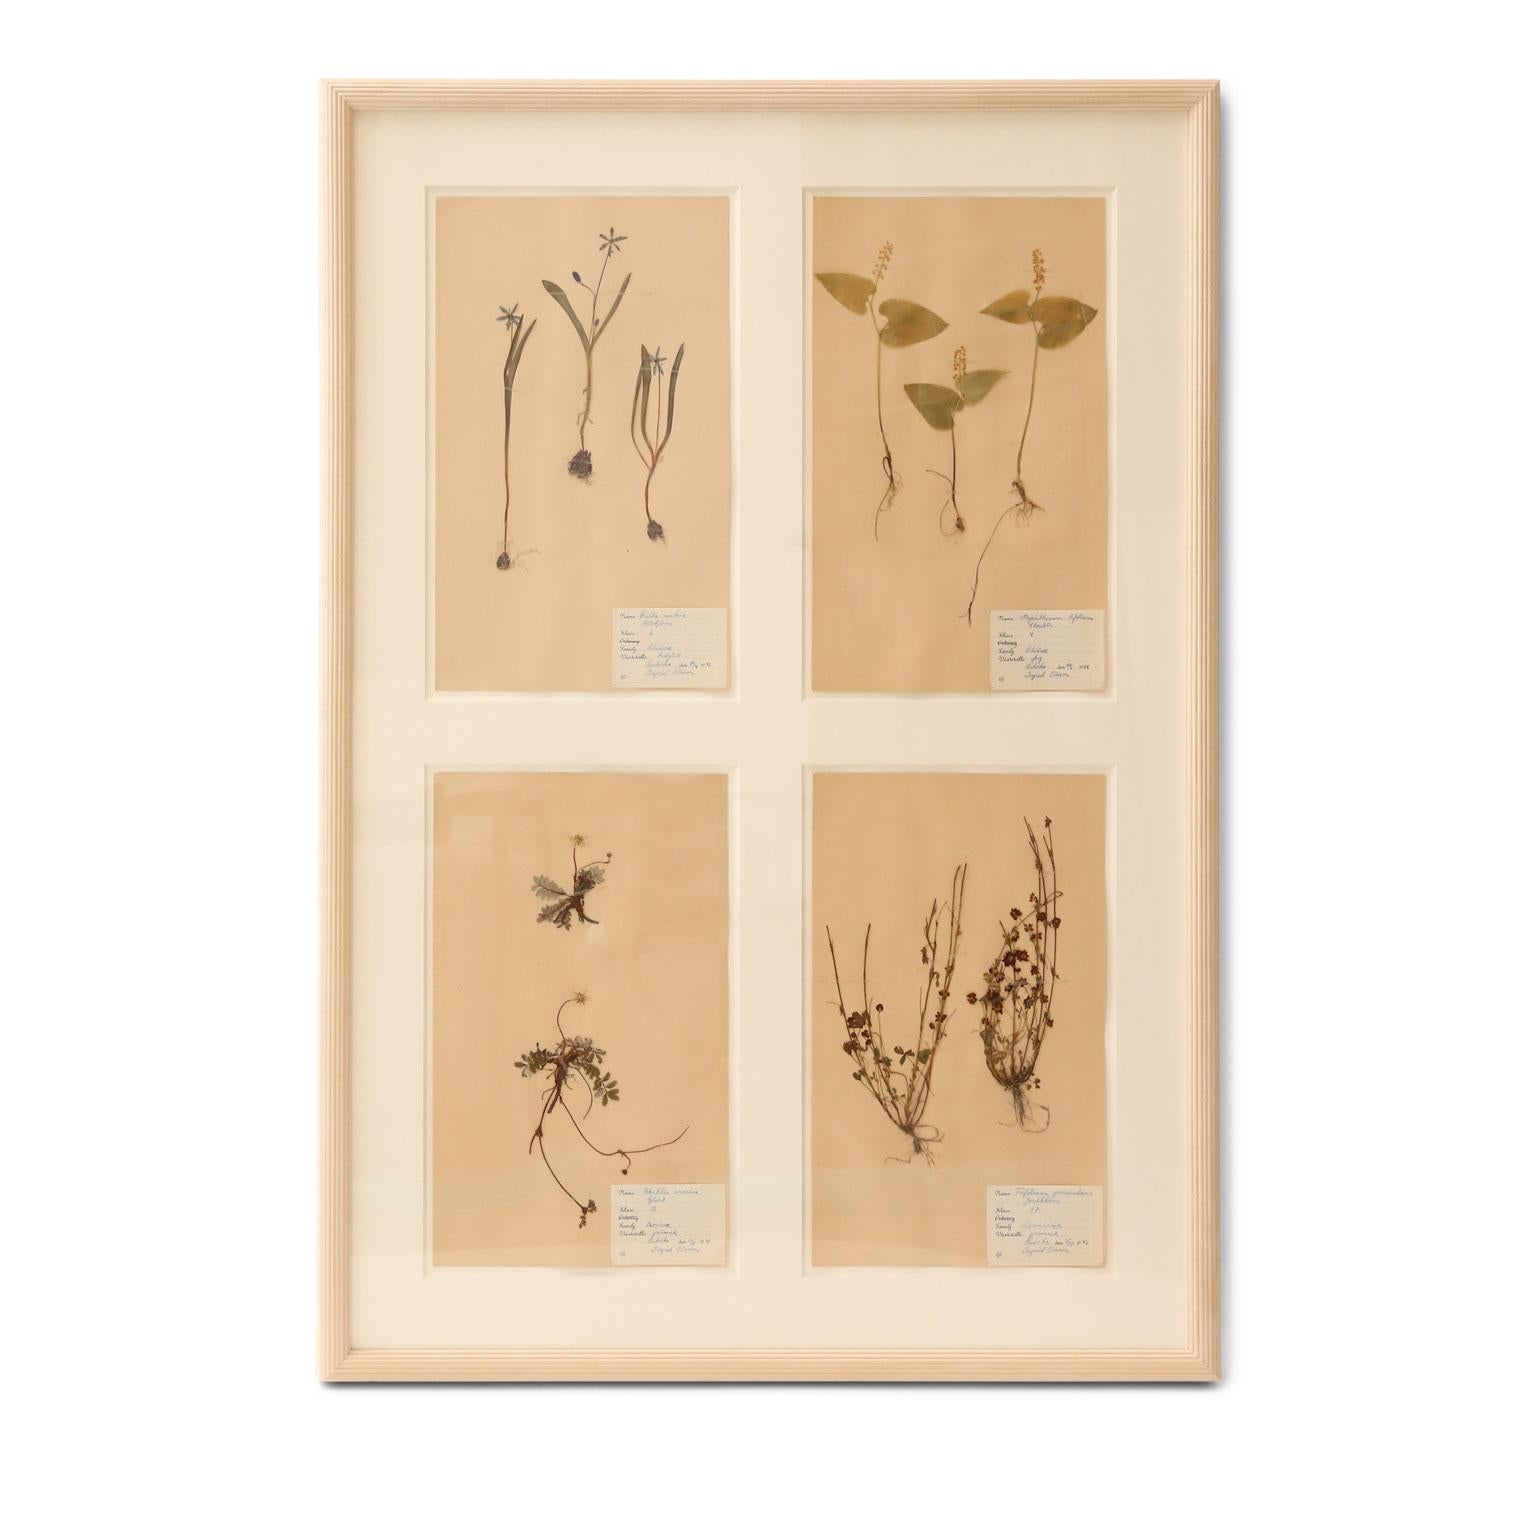 Framed set of four vintage herbaria (circa 1930-1949, Sweden). Each herbarium (botanical) measures 15.75 inches high x 9.5 inches wide and floats within a cut mat window. The set of four is framed in unfinished reeded wood.
Two additional sets